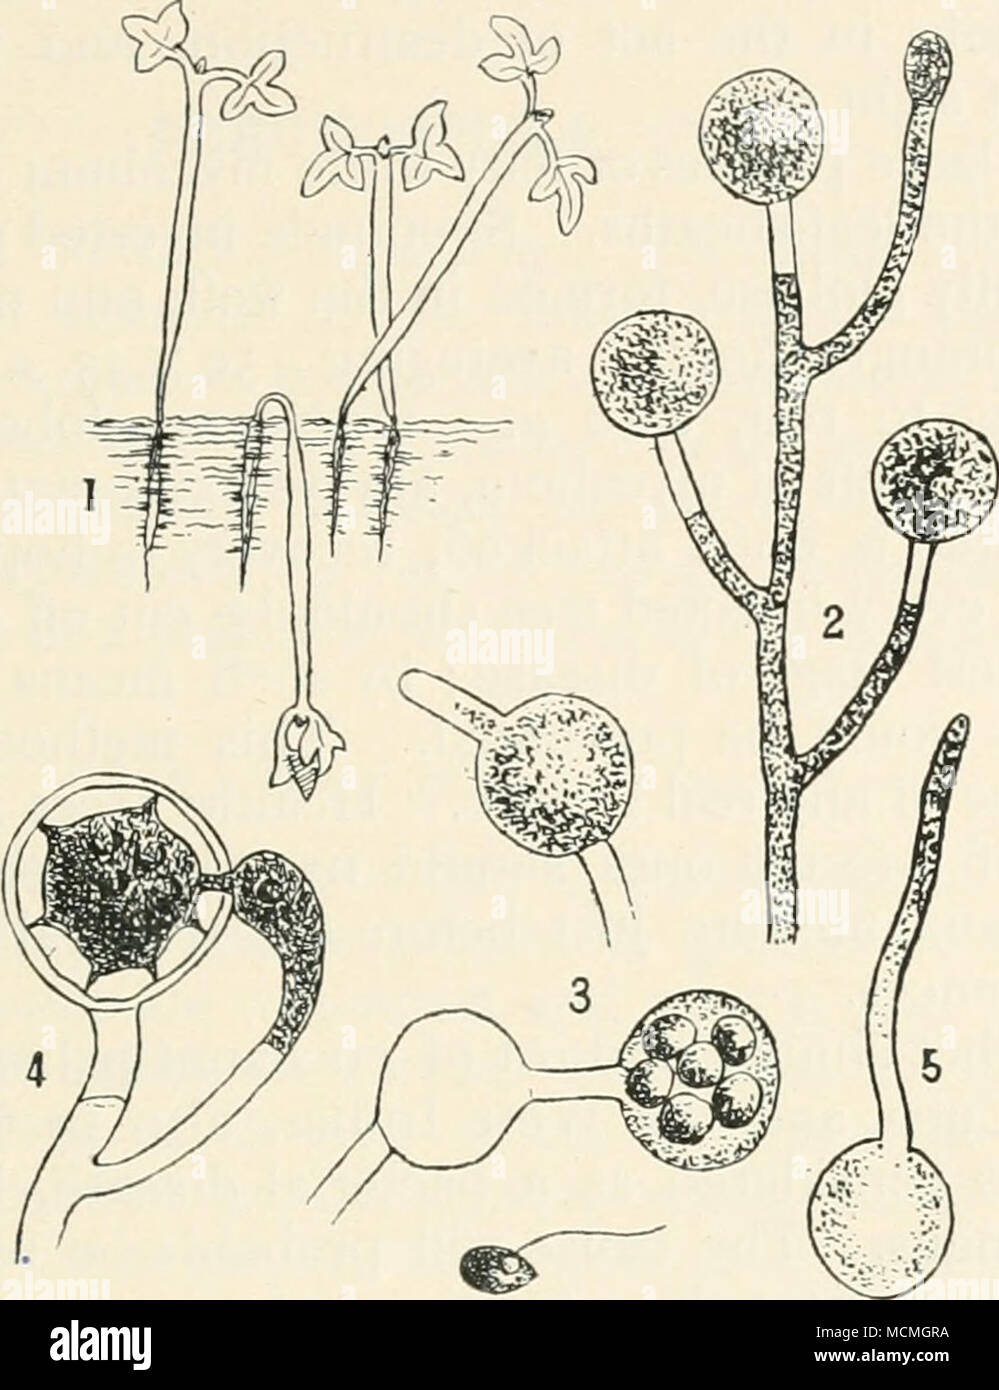 . FiG. 22,.—Pythium de baryanum. i, seedlings of cress [Le- pidizim sativutn) attacked by the fungus ; 2, mycelium bearing conidia at the tips of the branches ; 3, sporangia in different stages, also a free zoospore ; 4, an oosphere with the antheridium or male organ, which has pierced the wall of the oosphere, and inserted a slender tube for the purpose of allowing the contents of the antheridium to mingle with those of the oosphere. After this blending of the contents of the two organs, the oosphere becomes surrounded by a thick wall to form the oospore, or sexually produced resting-spore ;  Stock Photo